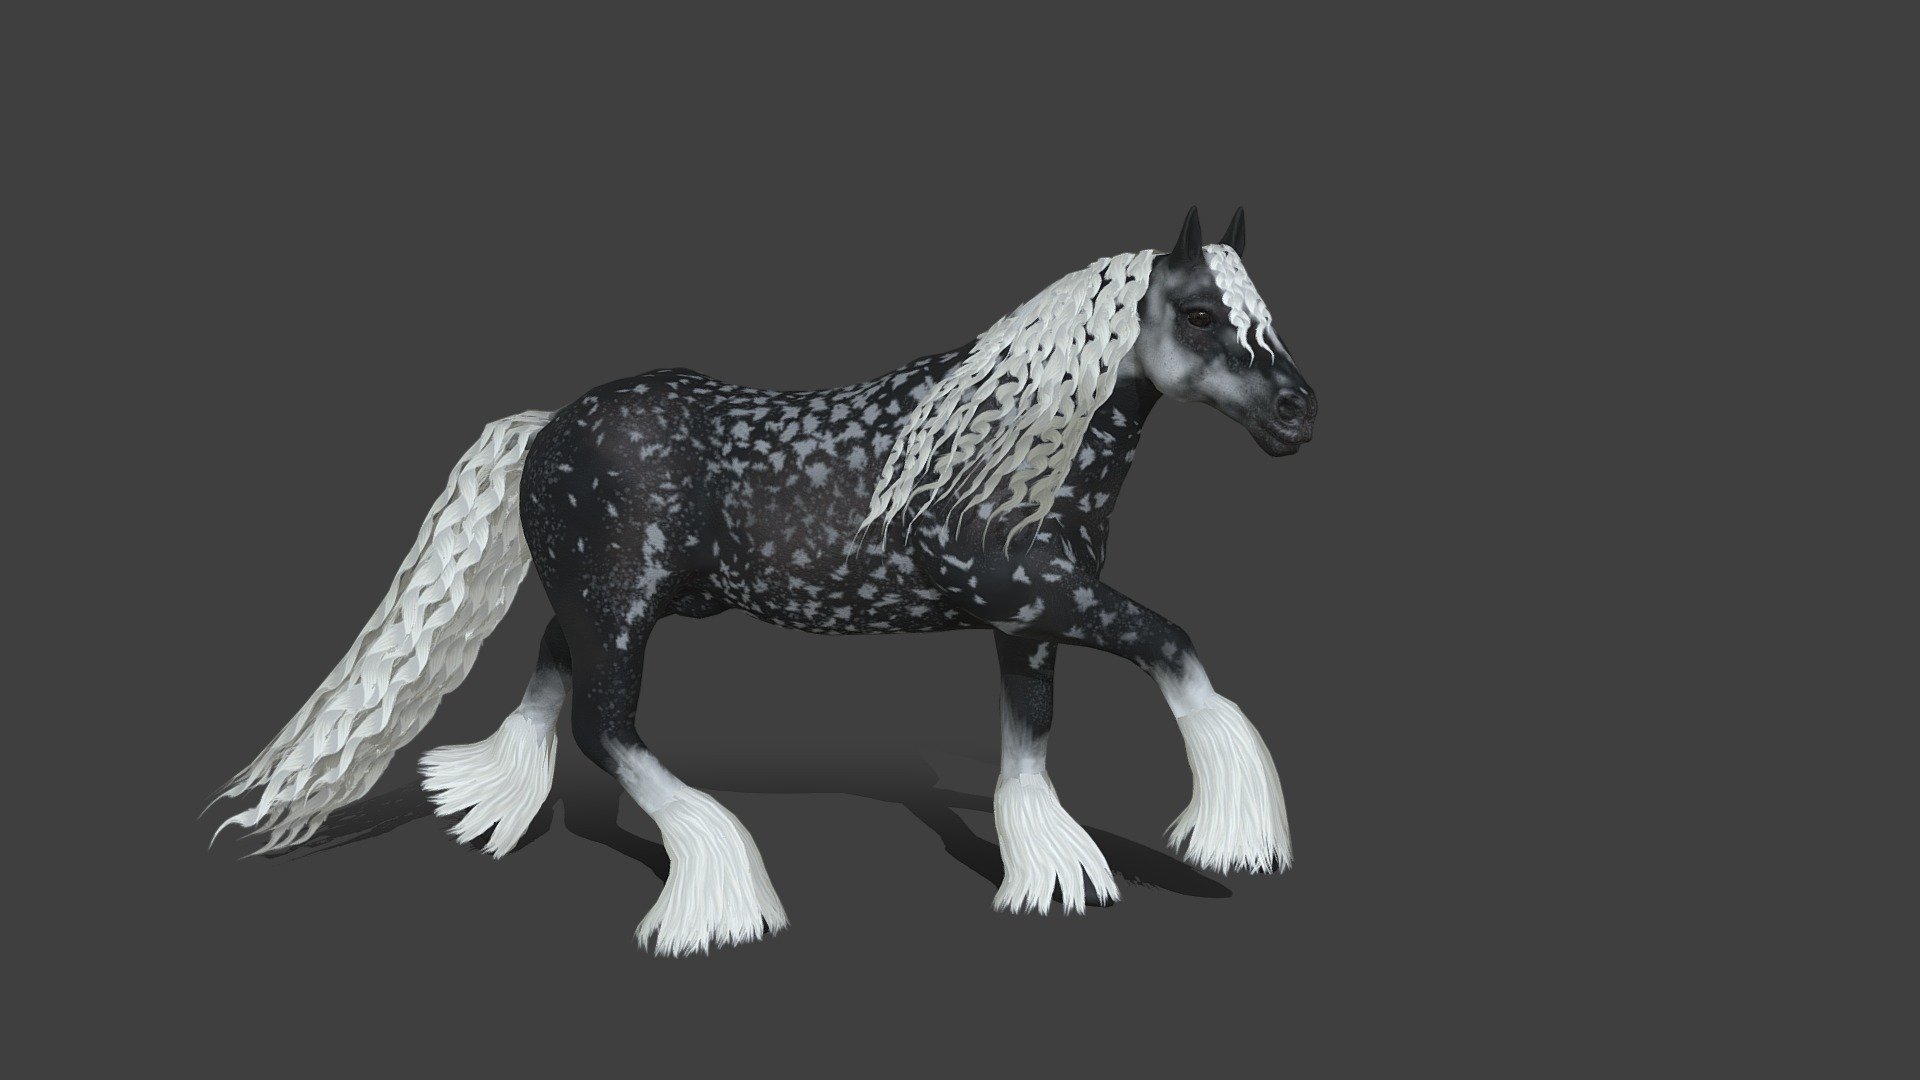 My second personal project - A Friesian x Cob cross. Super happy with how it turned out and the many skills I learned along the way - I think my retopology and hair card skills are coming along nicely. Sculpted in Zbrush, Retopologized and UVed in Maya, and textured in Substance 3D Painter. I still want to rig and pose this model, but I couldn't wait to get it uploaded! - Friesian Cross Horse - 3D model by keelymcdermot 3d model